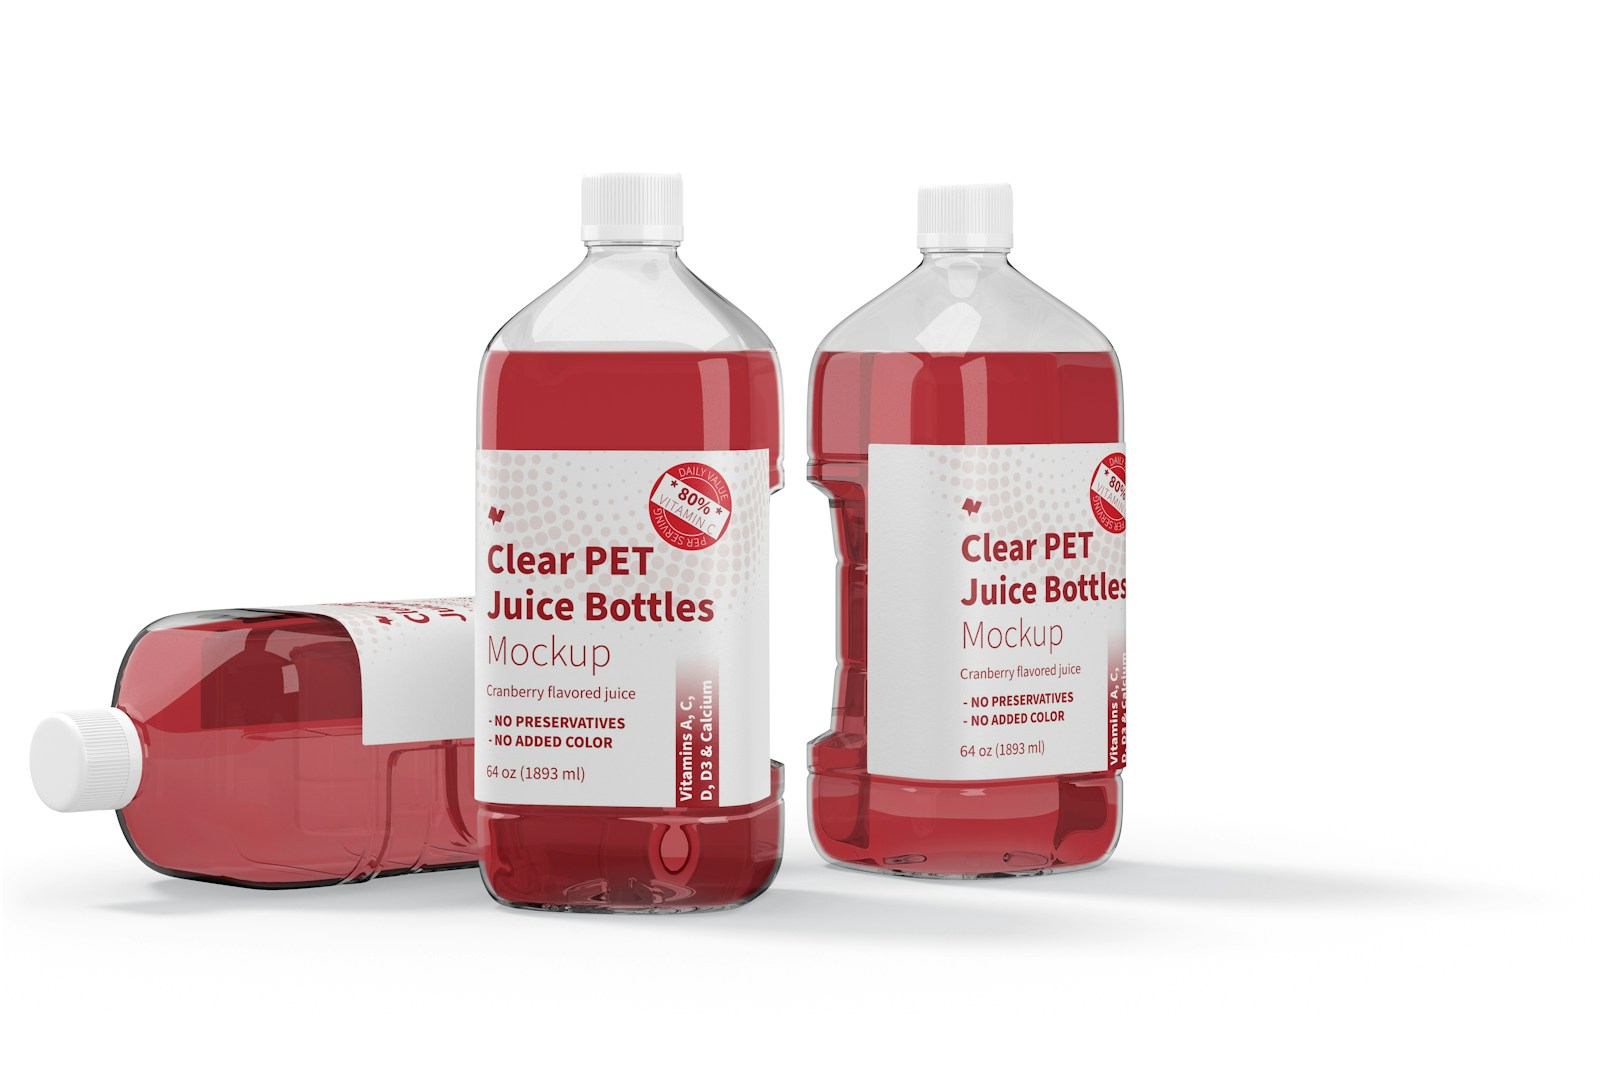 64 oz Clear PET Juice Bottles Mockup, Standing and Dropped